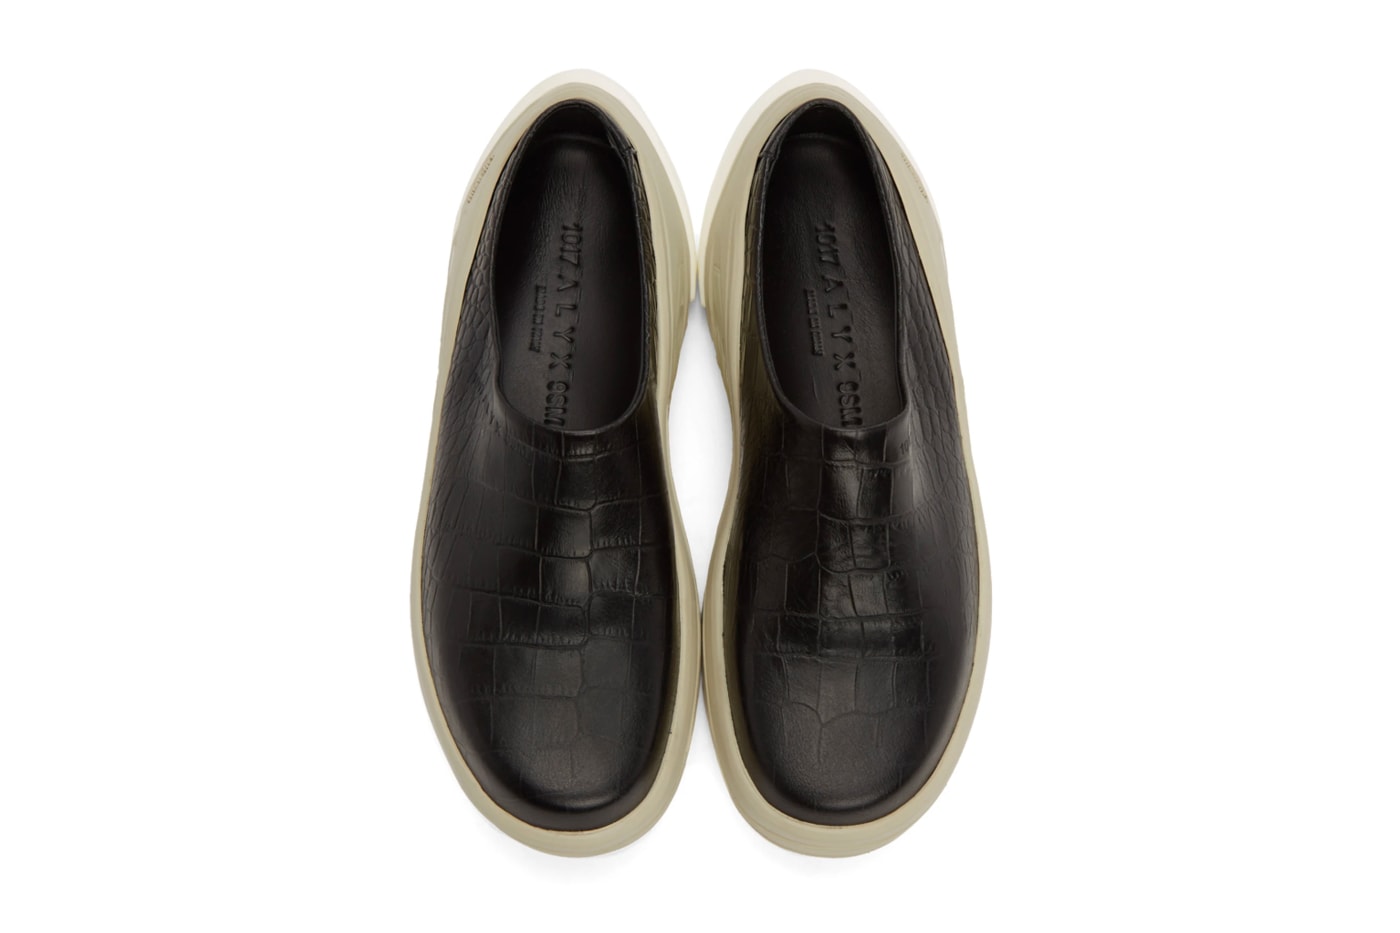 1017 ALYX 9SM Black Croc Leather Clog patent skin spring summer 2020 collection matthew M williams designers made in italy shoes sneakers footwear kicks trainers runners slippers 